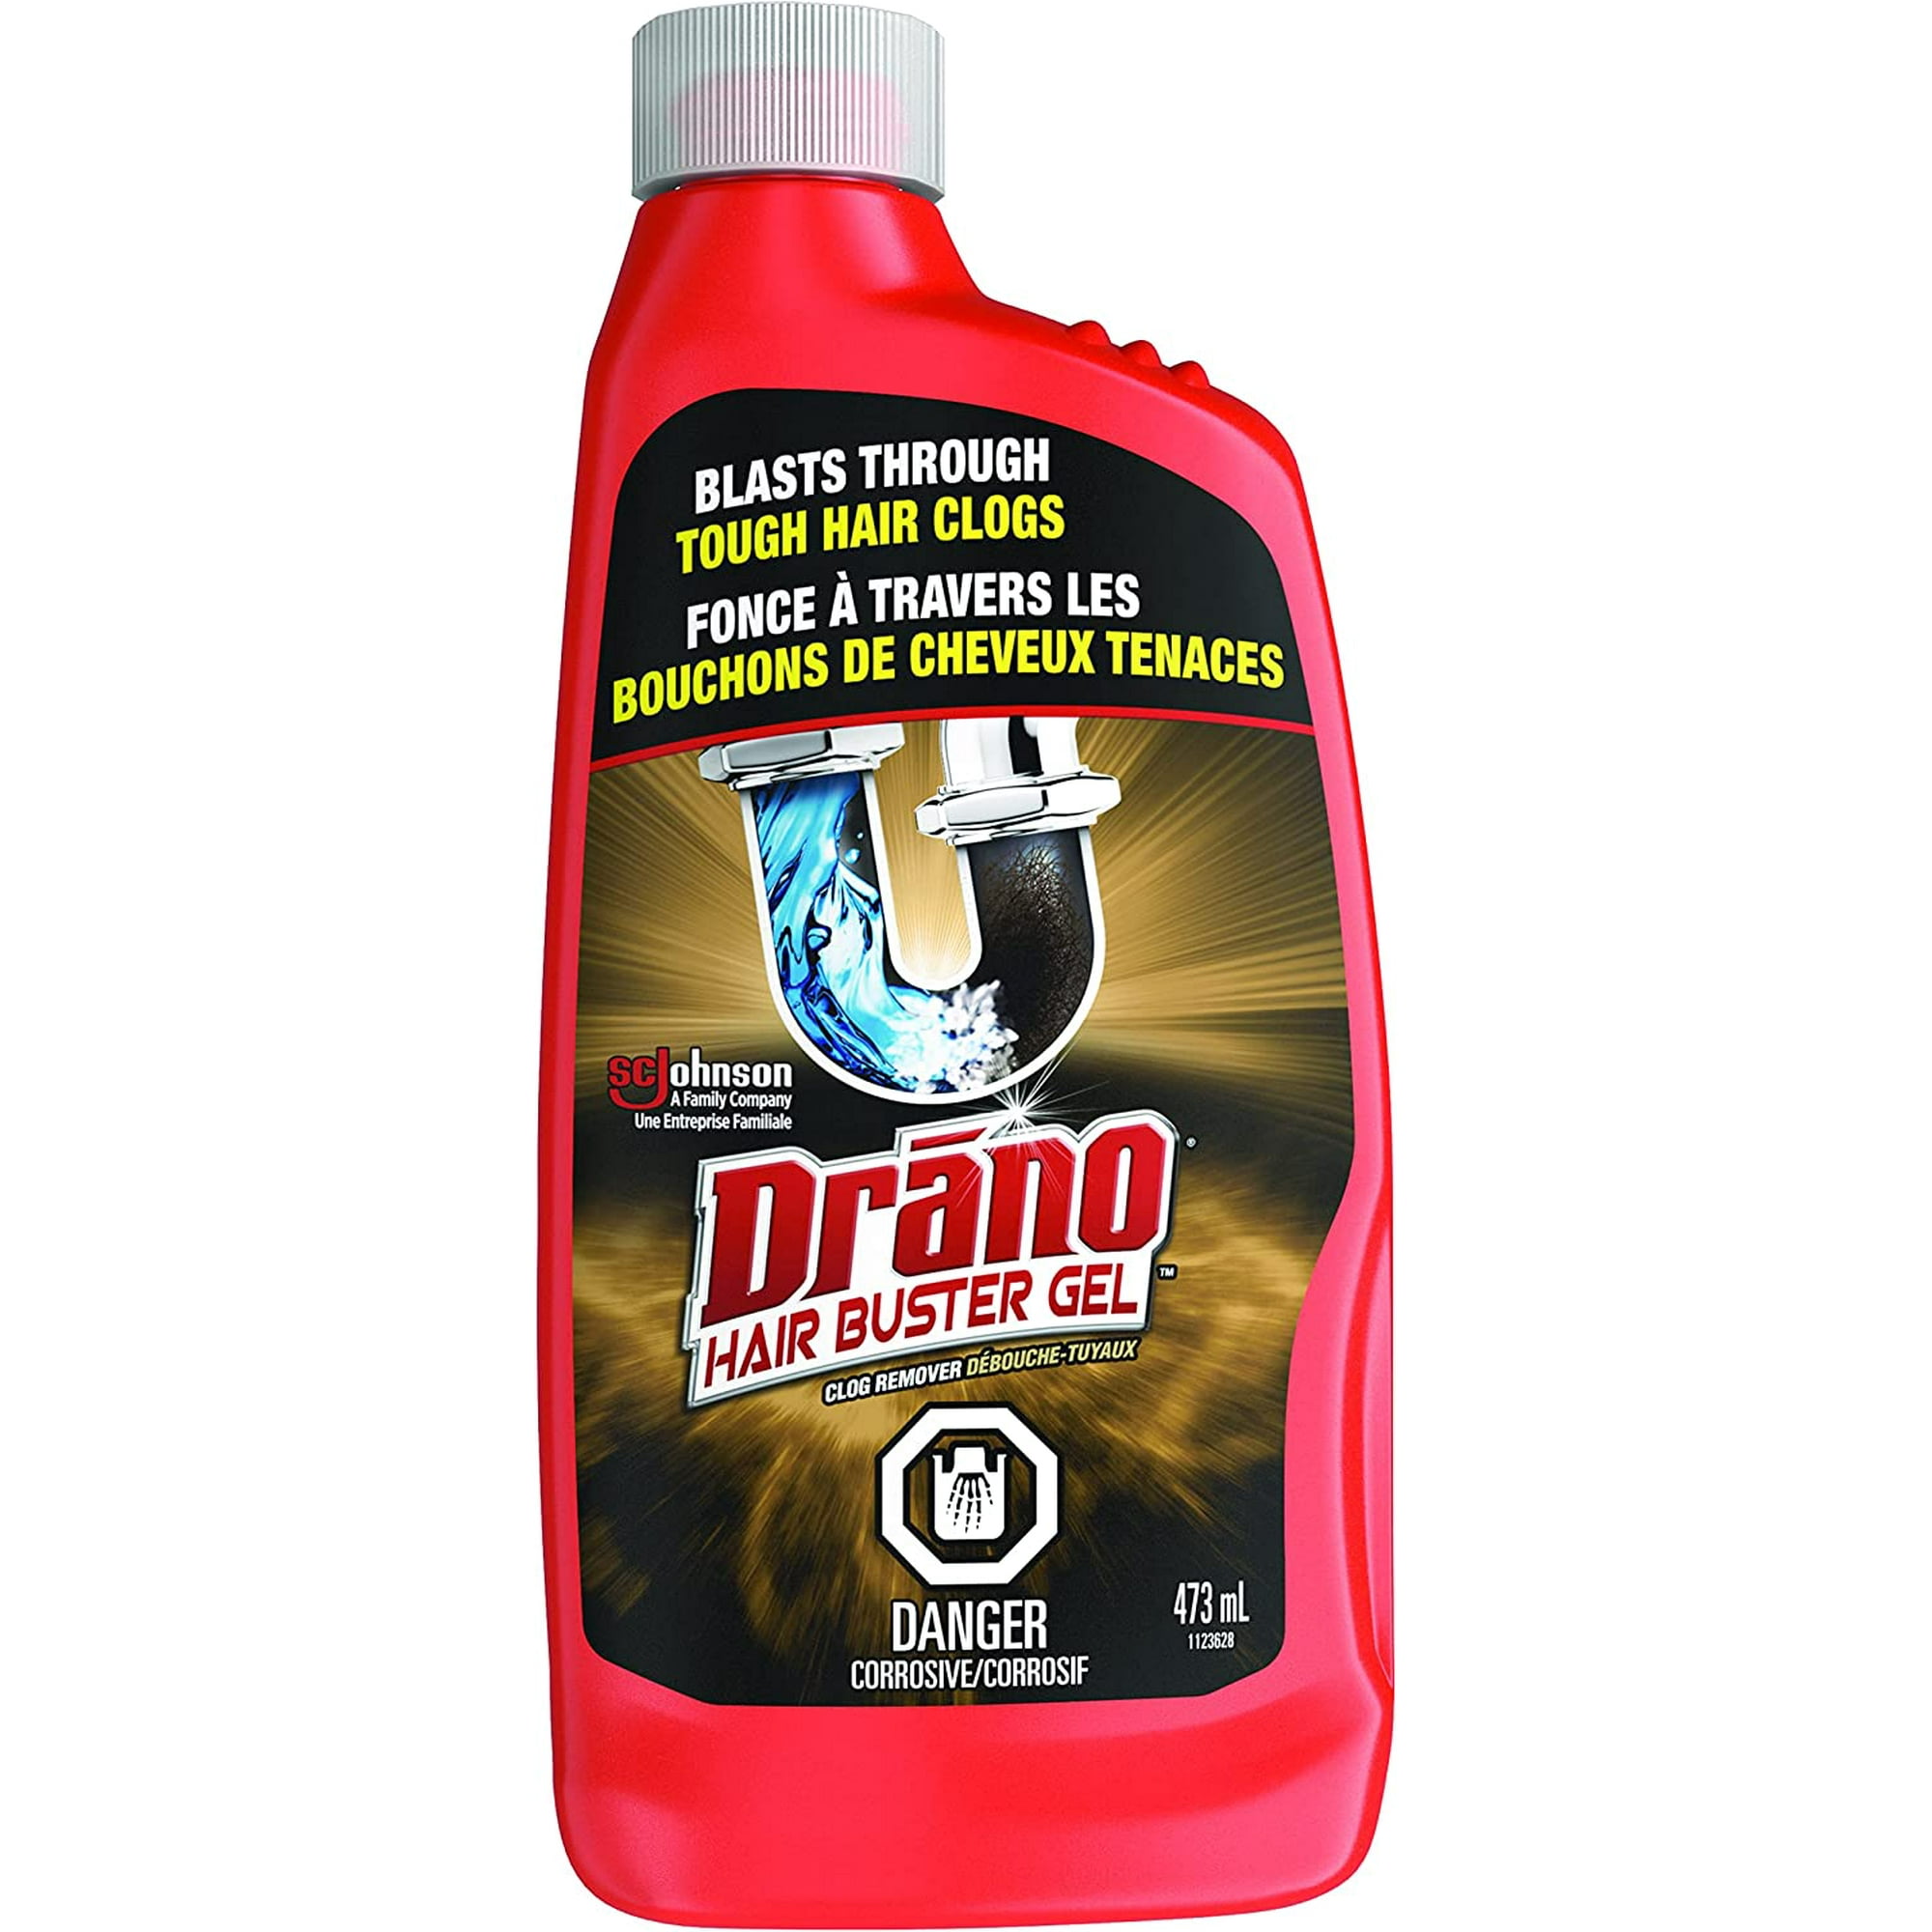 Drano Hair Buster Gel Remover, Drain Clog Remover and Cleaner for Shower or  Sink Drains, 473ml | Walmart Canada